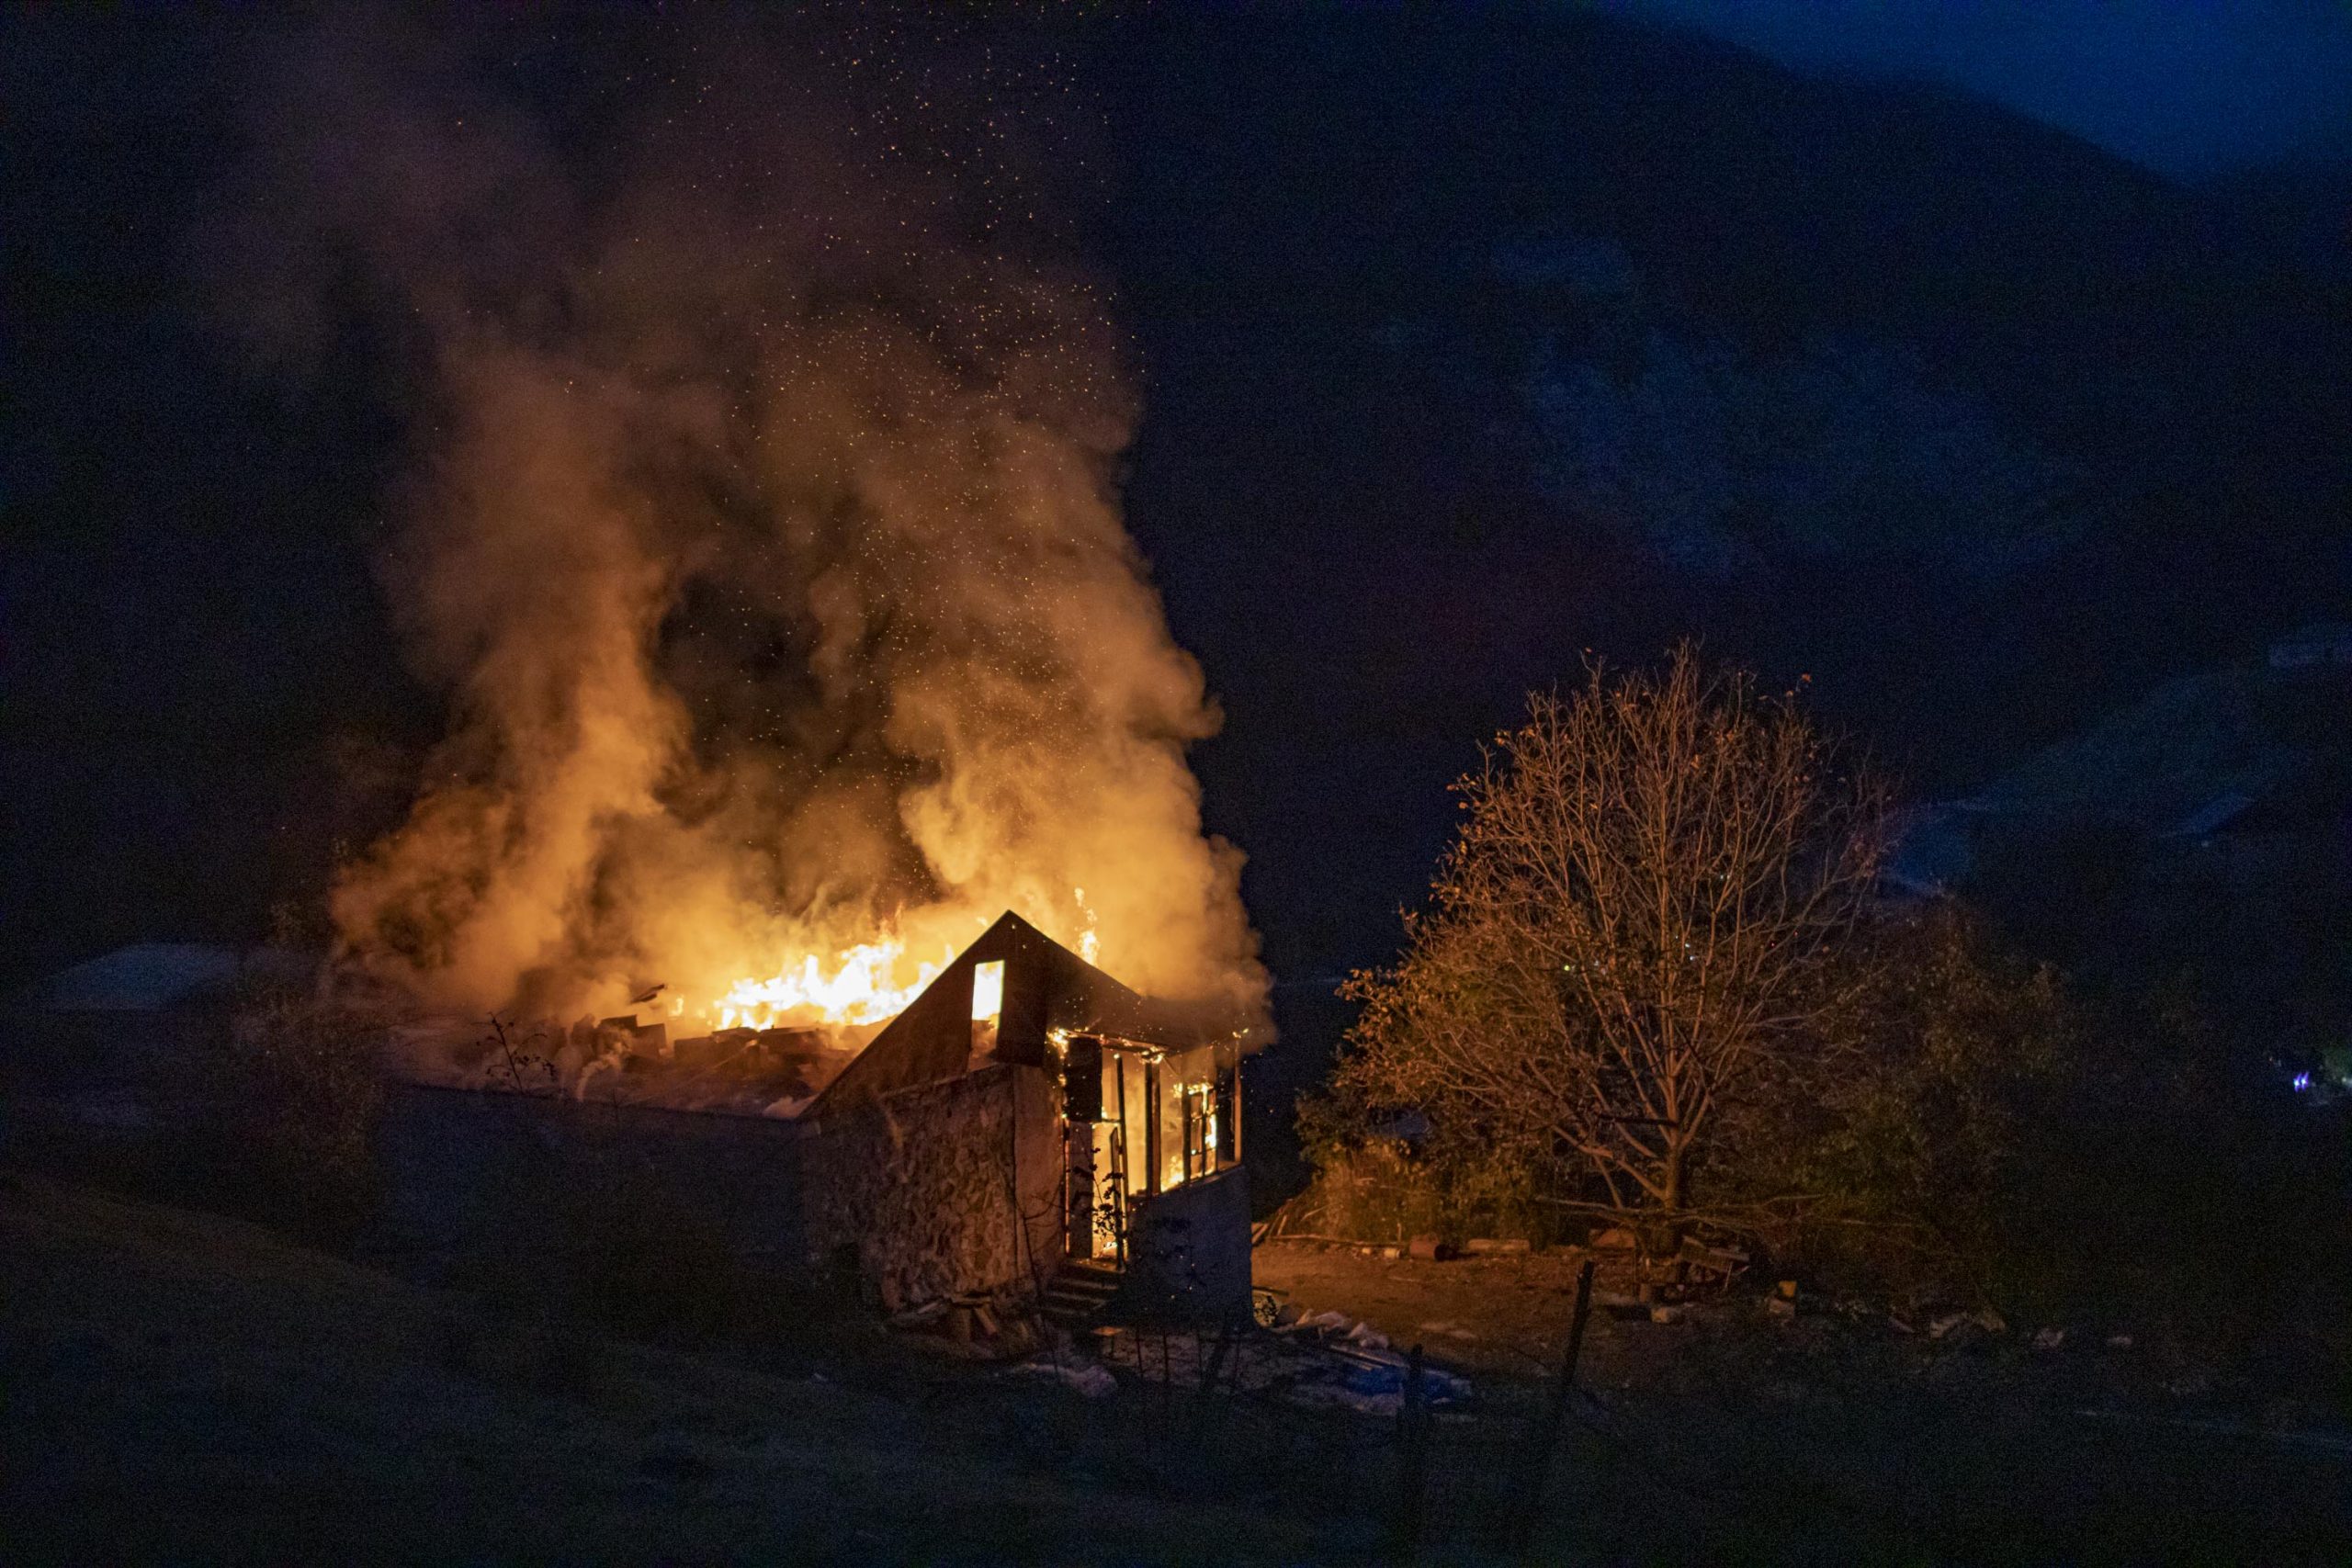 House set on fire by its owners, close to Dadivank Monastery in Kalbajar region, seen on November 14, 2020. Kalbajar is one of the regions surrounding Nagorno-Karabakh, turned over to Azerbaijan as the Nagorno-Karabakh war ended. In numerous cases Armenians burned their houses in this region, in order for them not to be inhabited by people moving here from Azerbaijan.